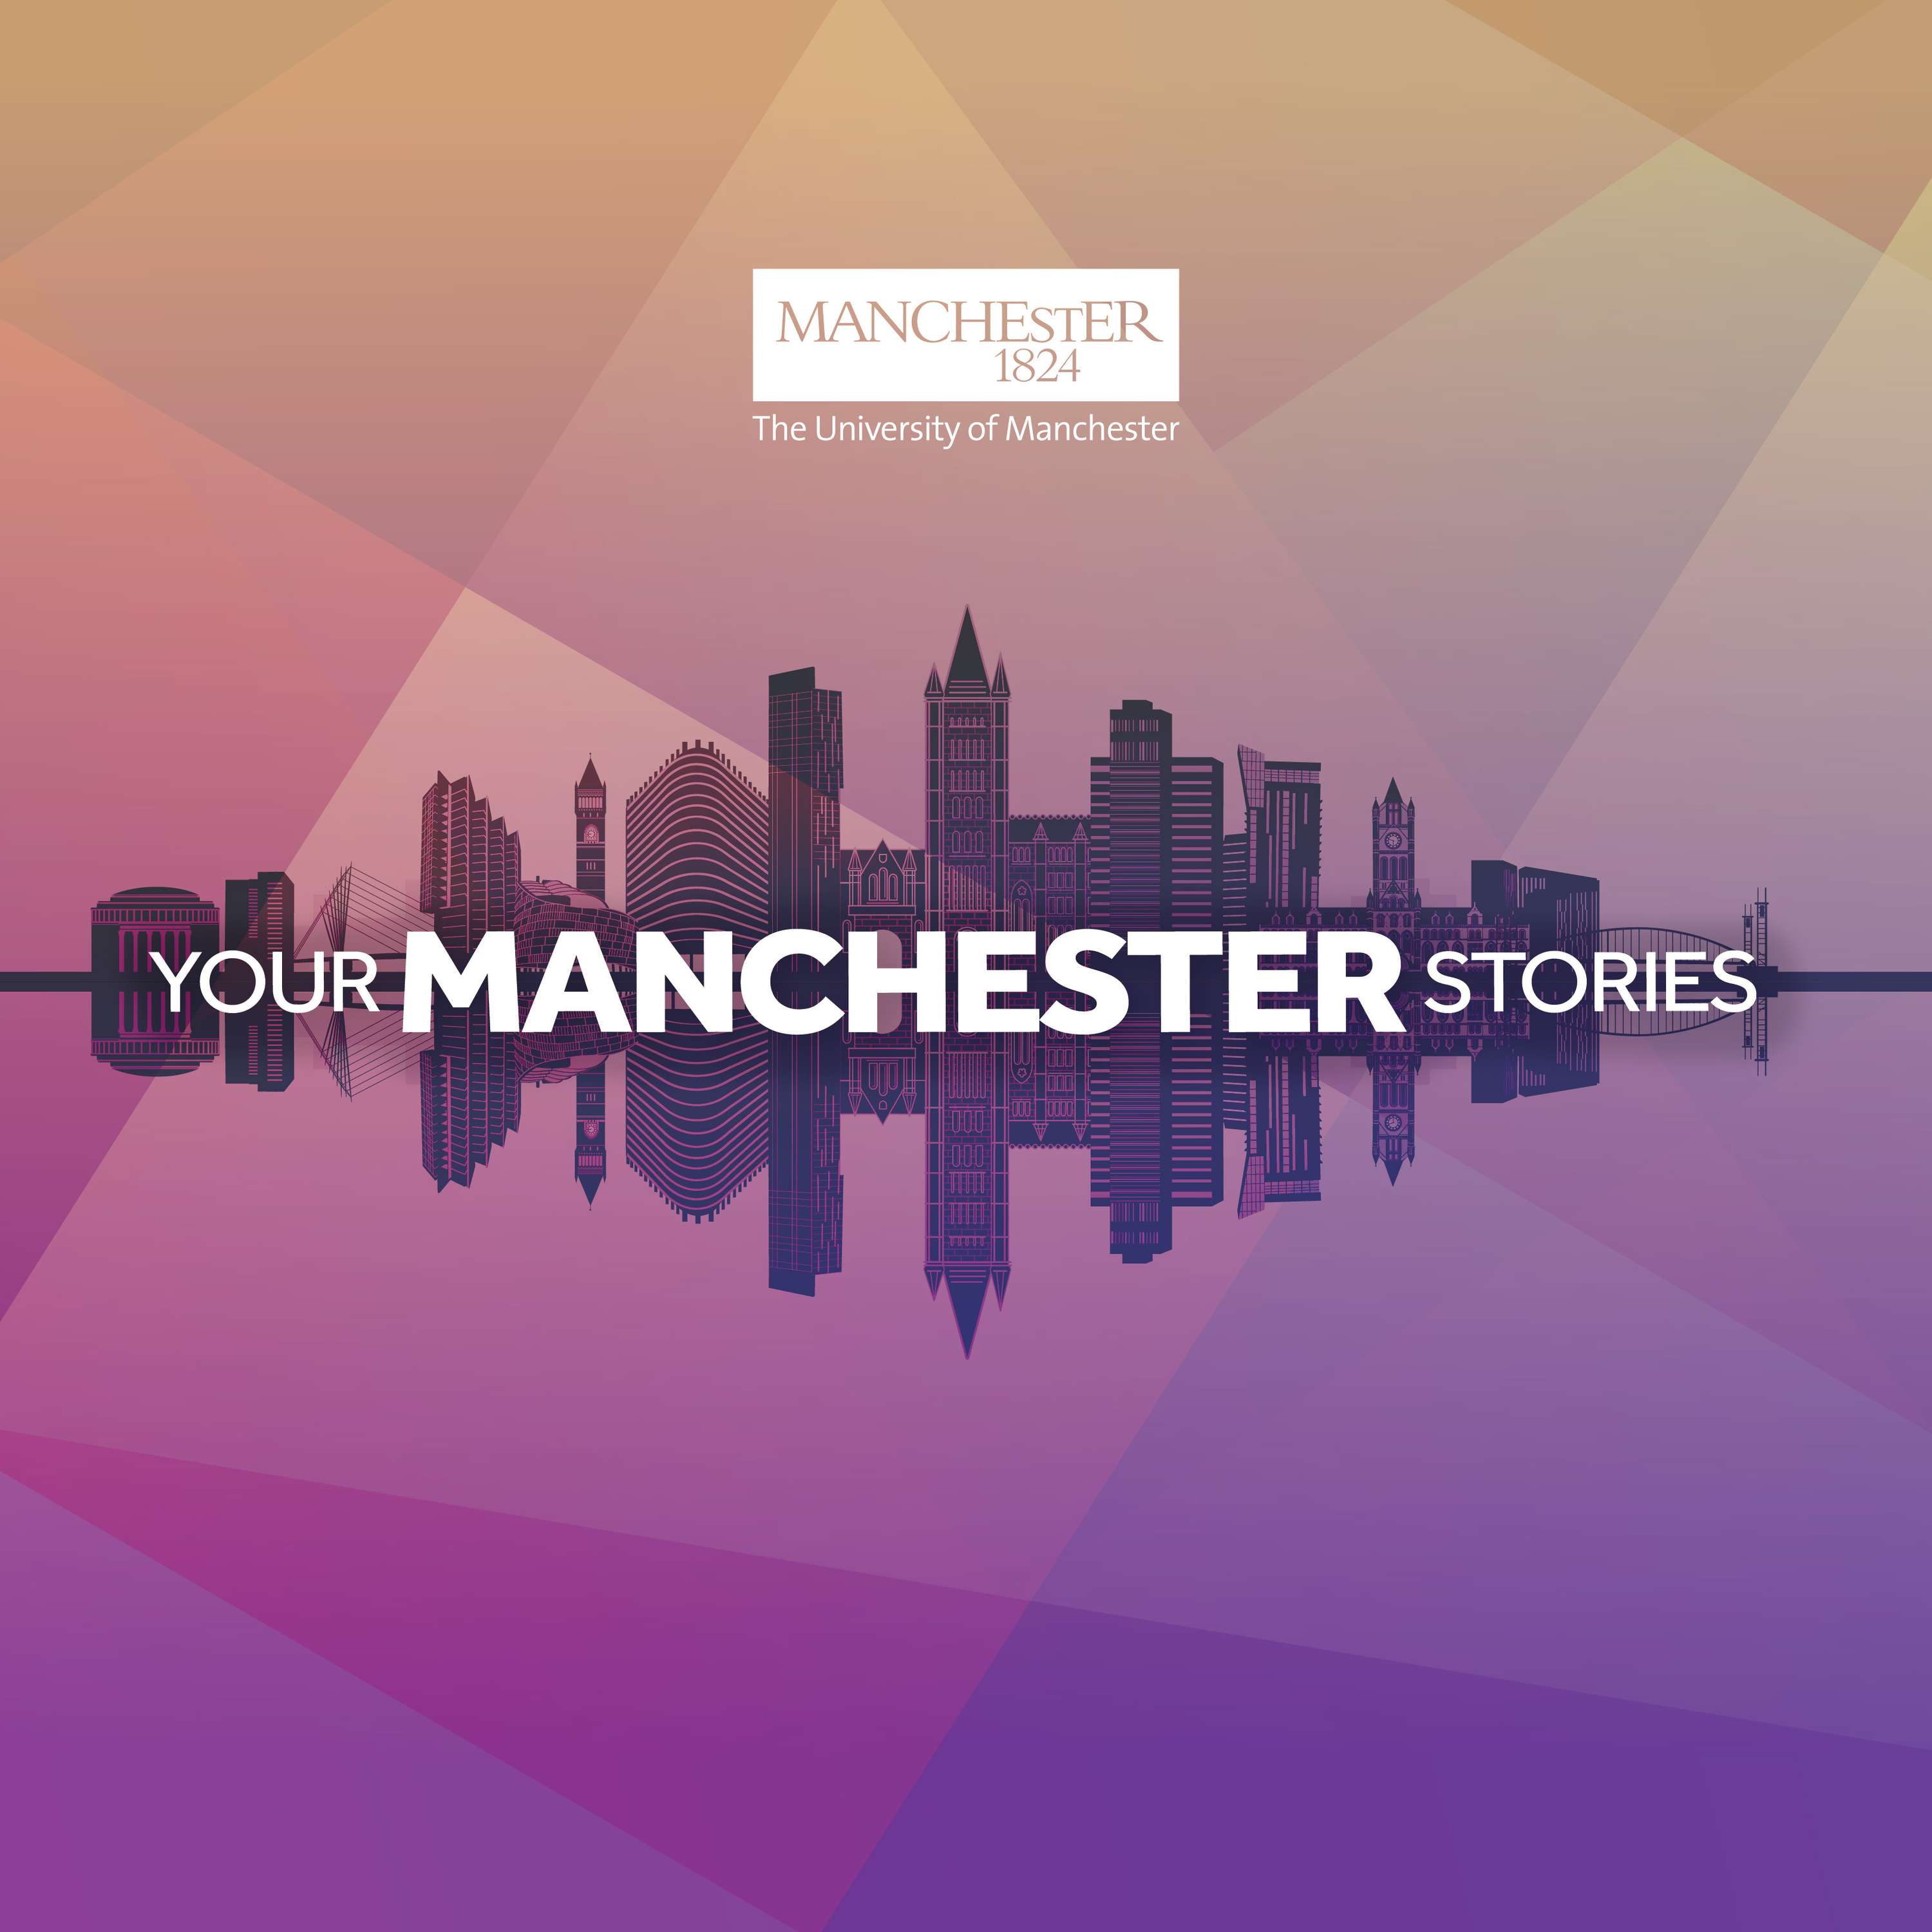 Your Manchester Stories - Series highlights